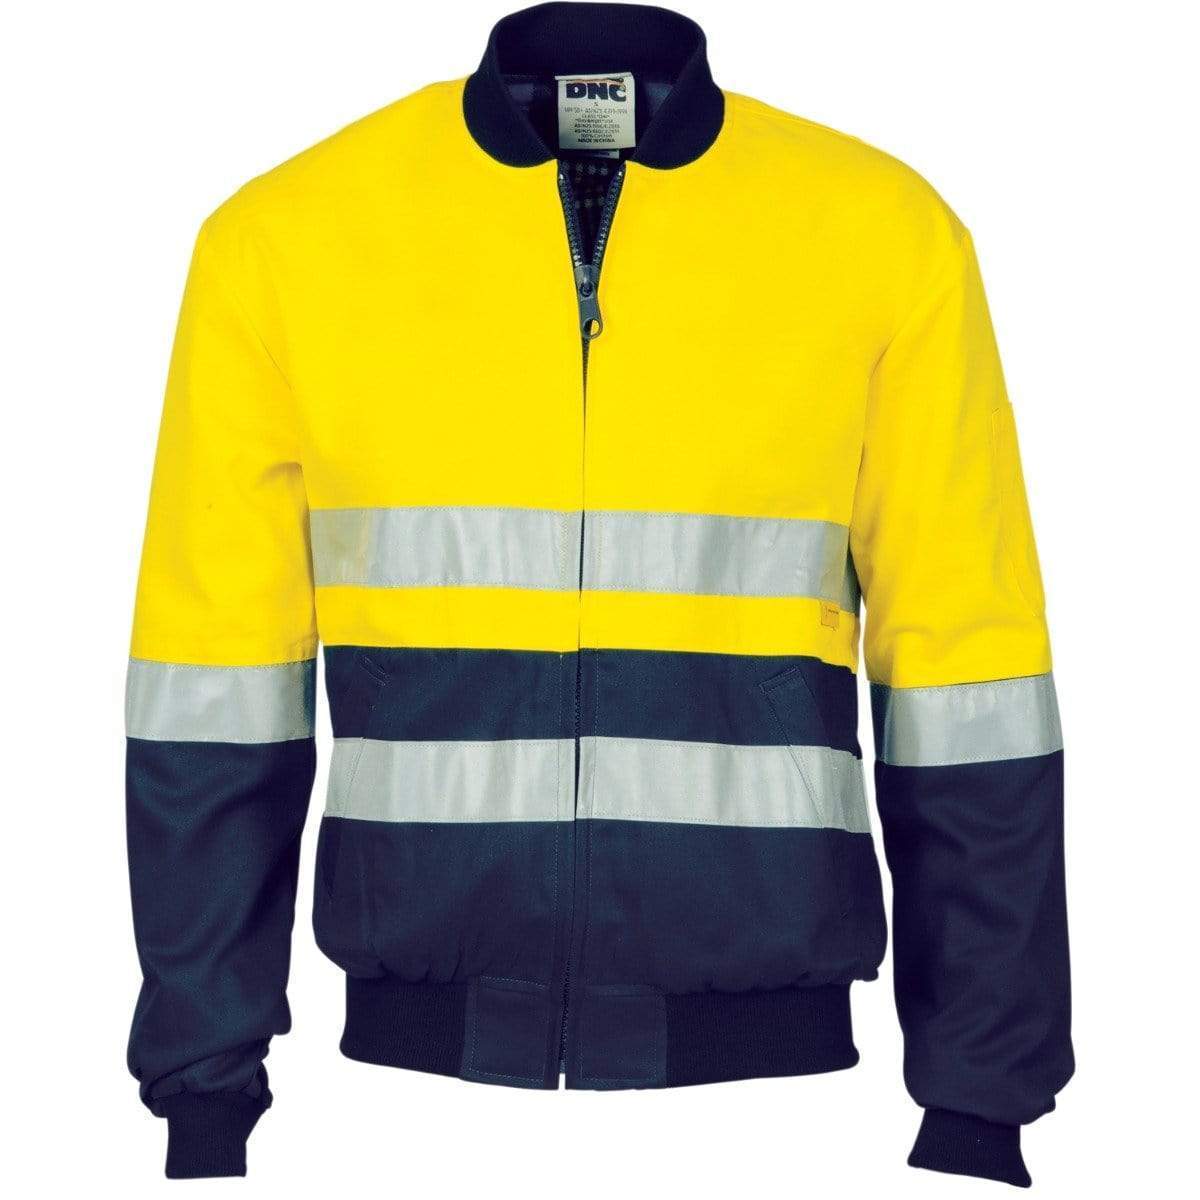 Dnc Workwear Hi-vis Two-tone D/n Cotton Bomber Jacket With 3m Reflective Tape - 3758 Work Wear DNC Workwear Yellow/Navy XS 